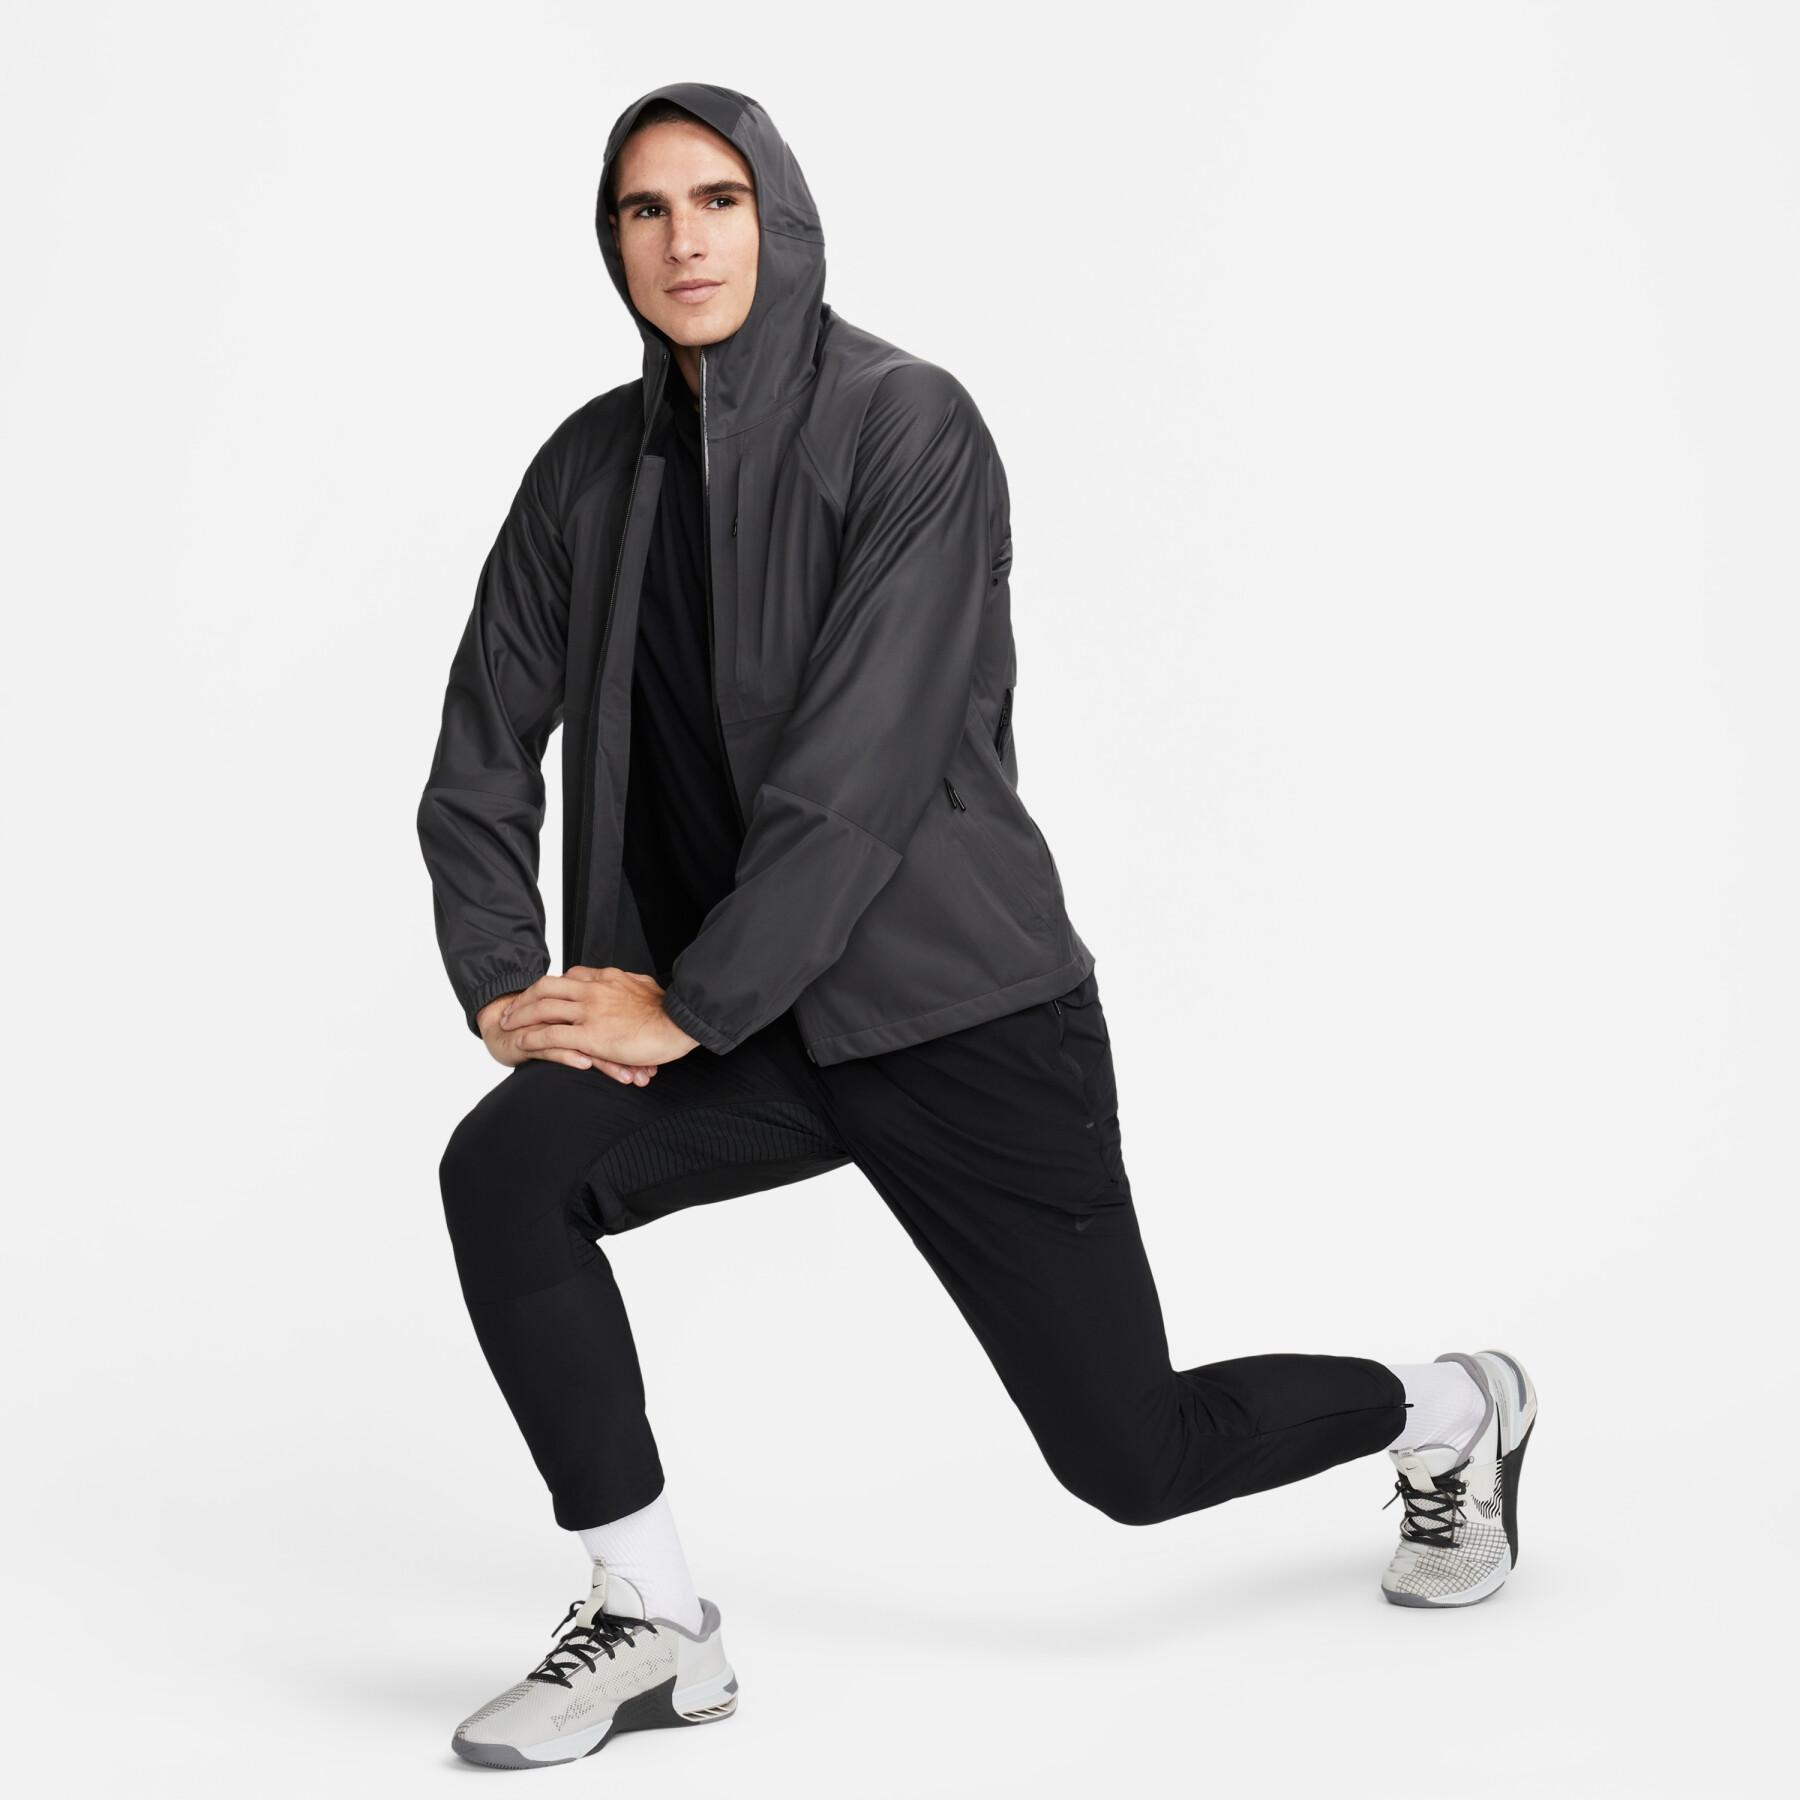 Giacca impermeabile Nike Storm-FIT ADV Axis